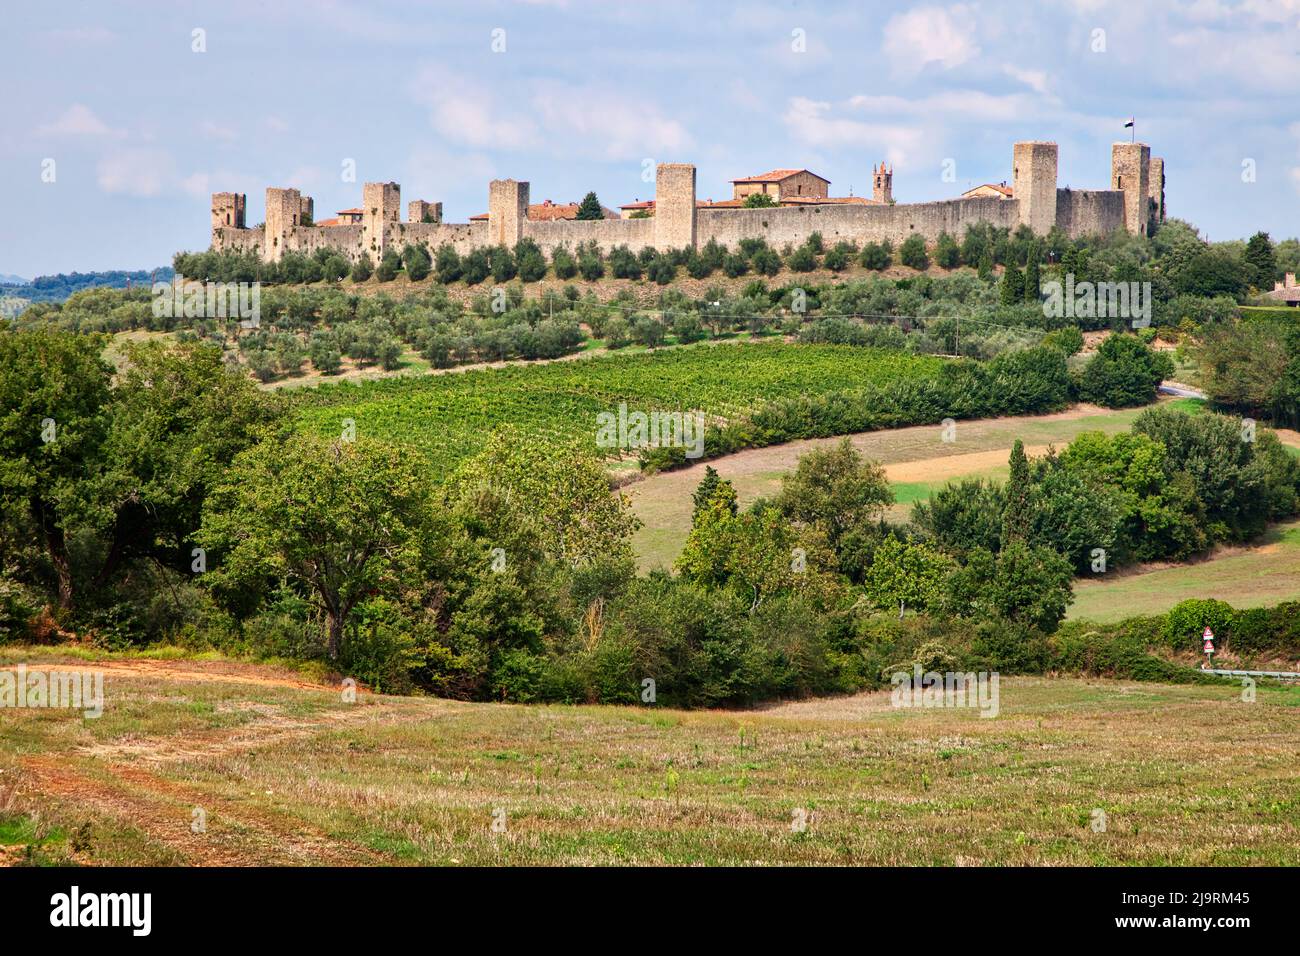 Italy, Tuscany, Monteriggioni. Ancient walled hill town. Stock Photo